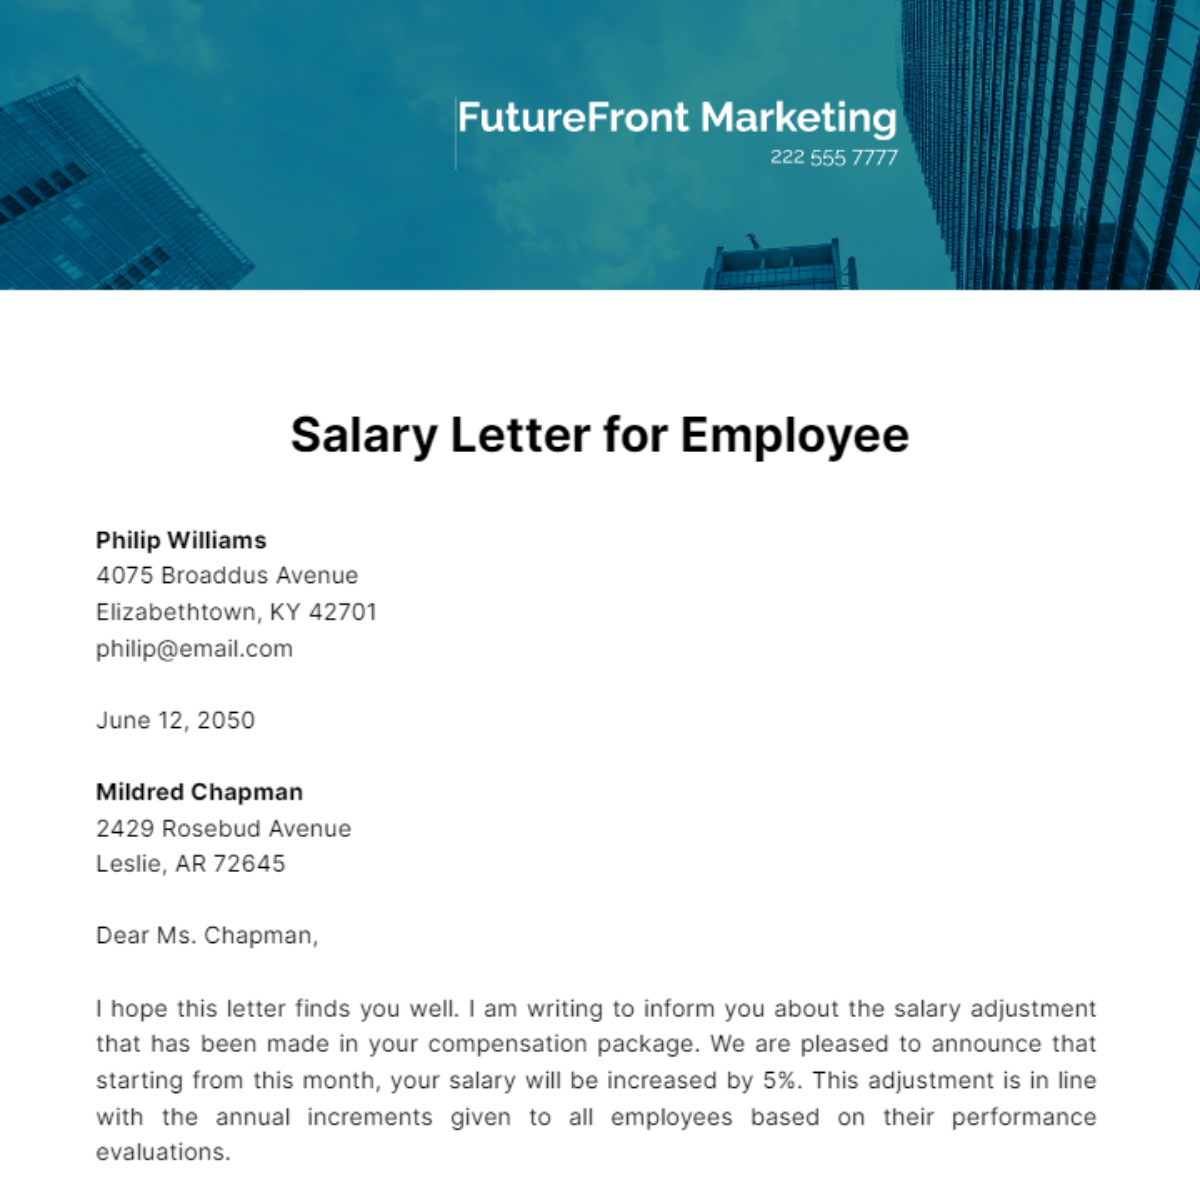 Salary Letter for Employee Template